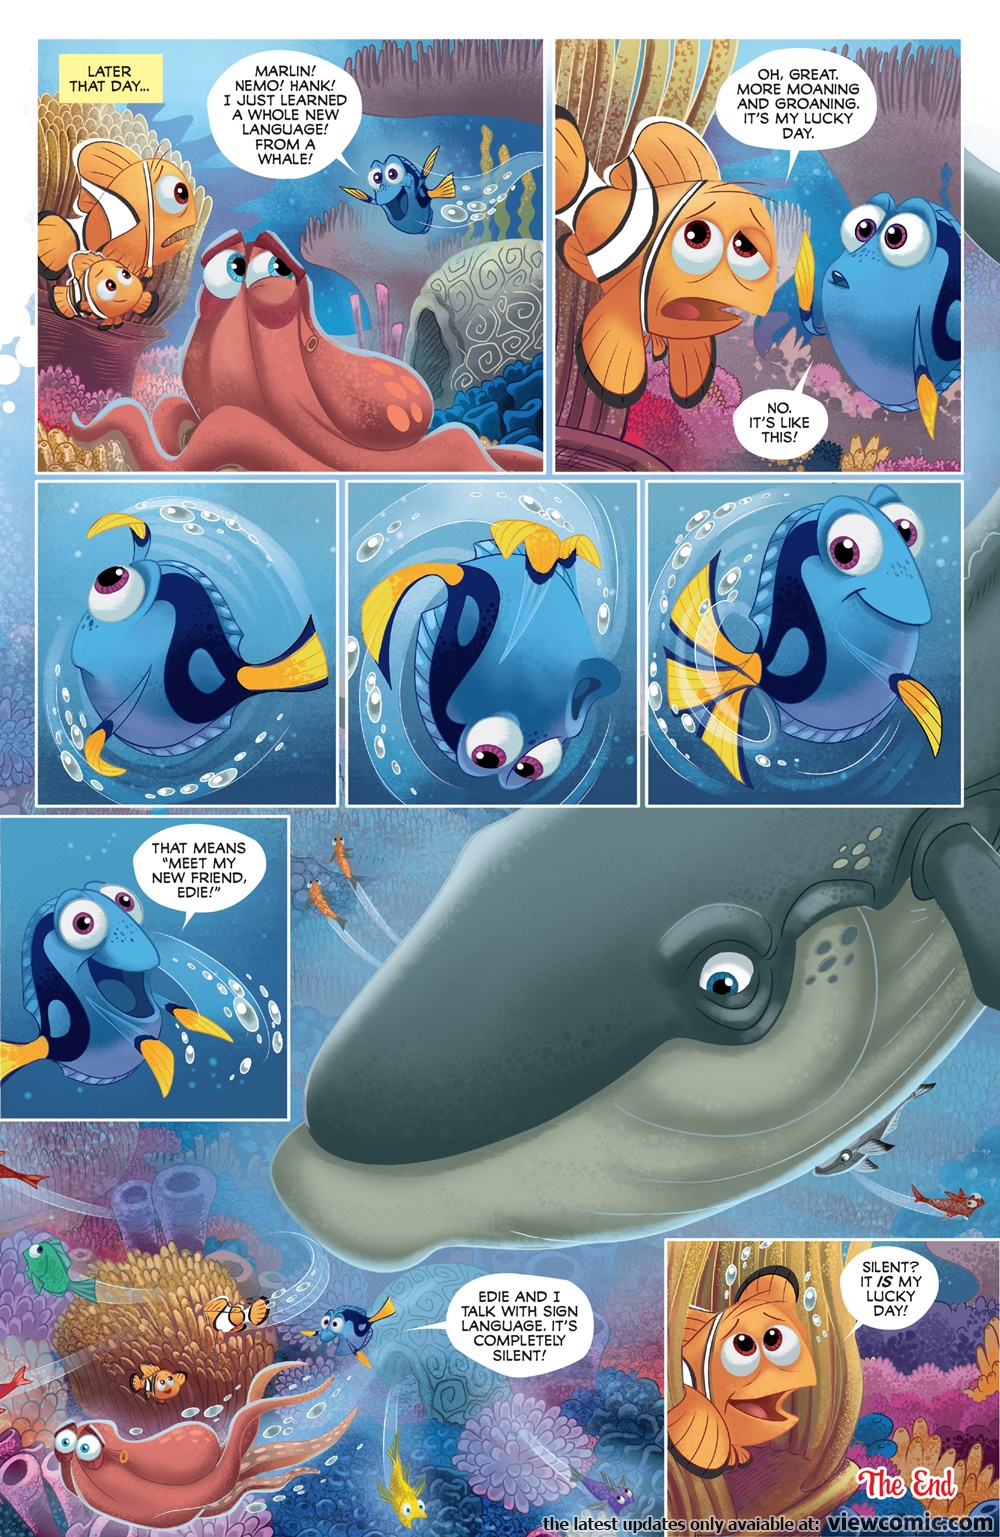 Finding Nemo Porn Comic - Disney Pixar Finding Dory 001 2017 | Read Disney Pixar Finding Dory 001  2017 comic online in high quality. Read Full Comic online for free - Read  comics online in high quality .| READ COMIC ONLINE